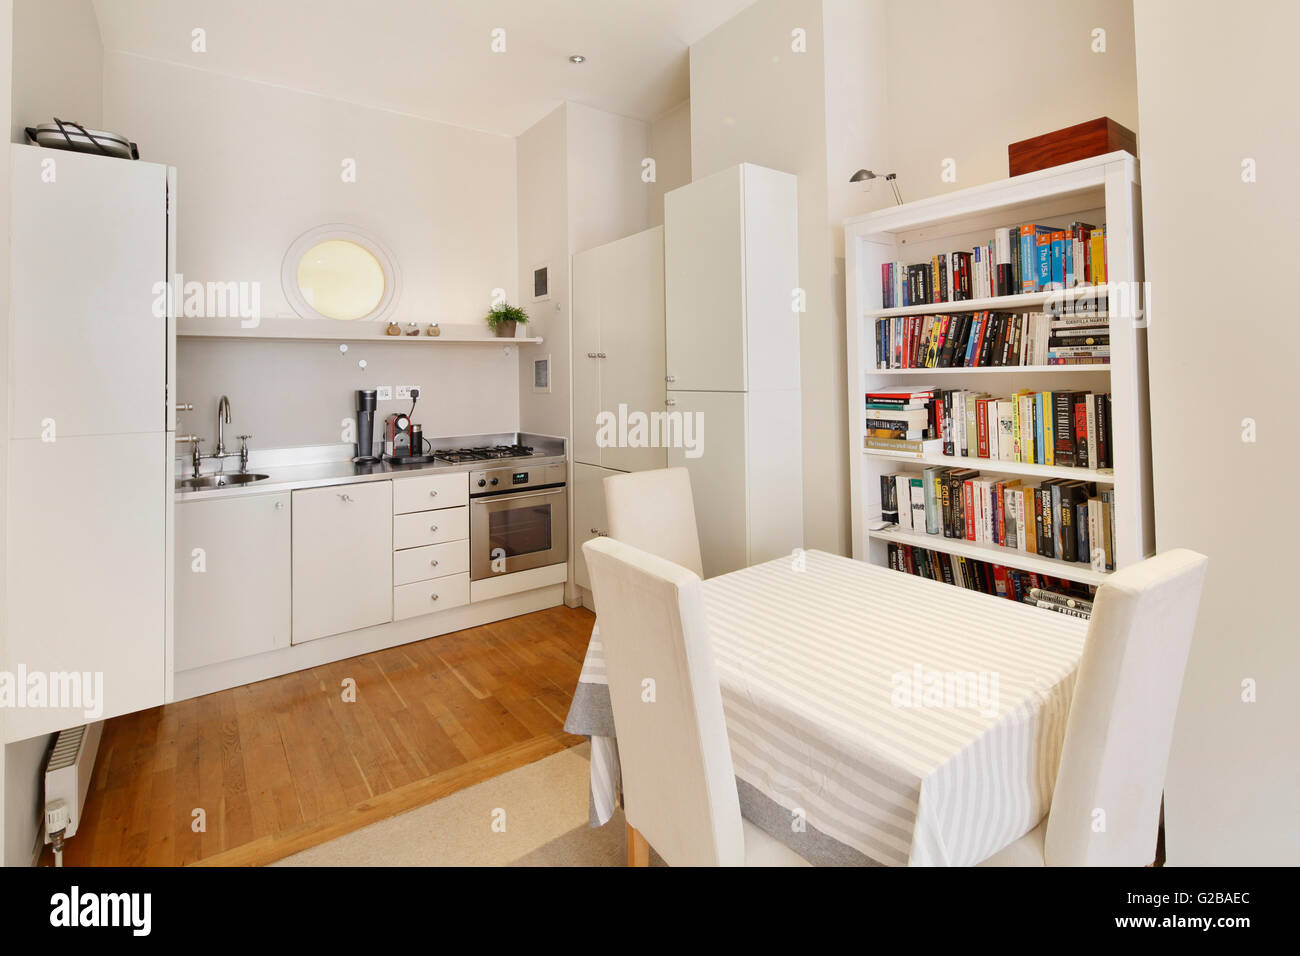 Foley House, Maddox Street. Open plan kitchen and dining area with all white features. Stock Photo